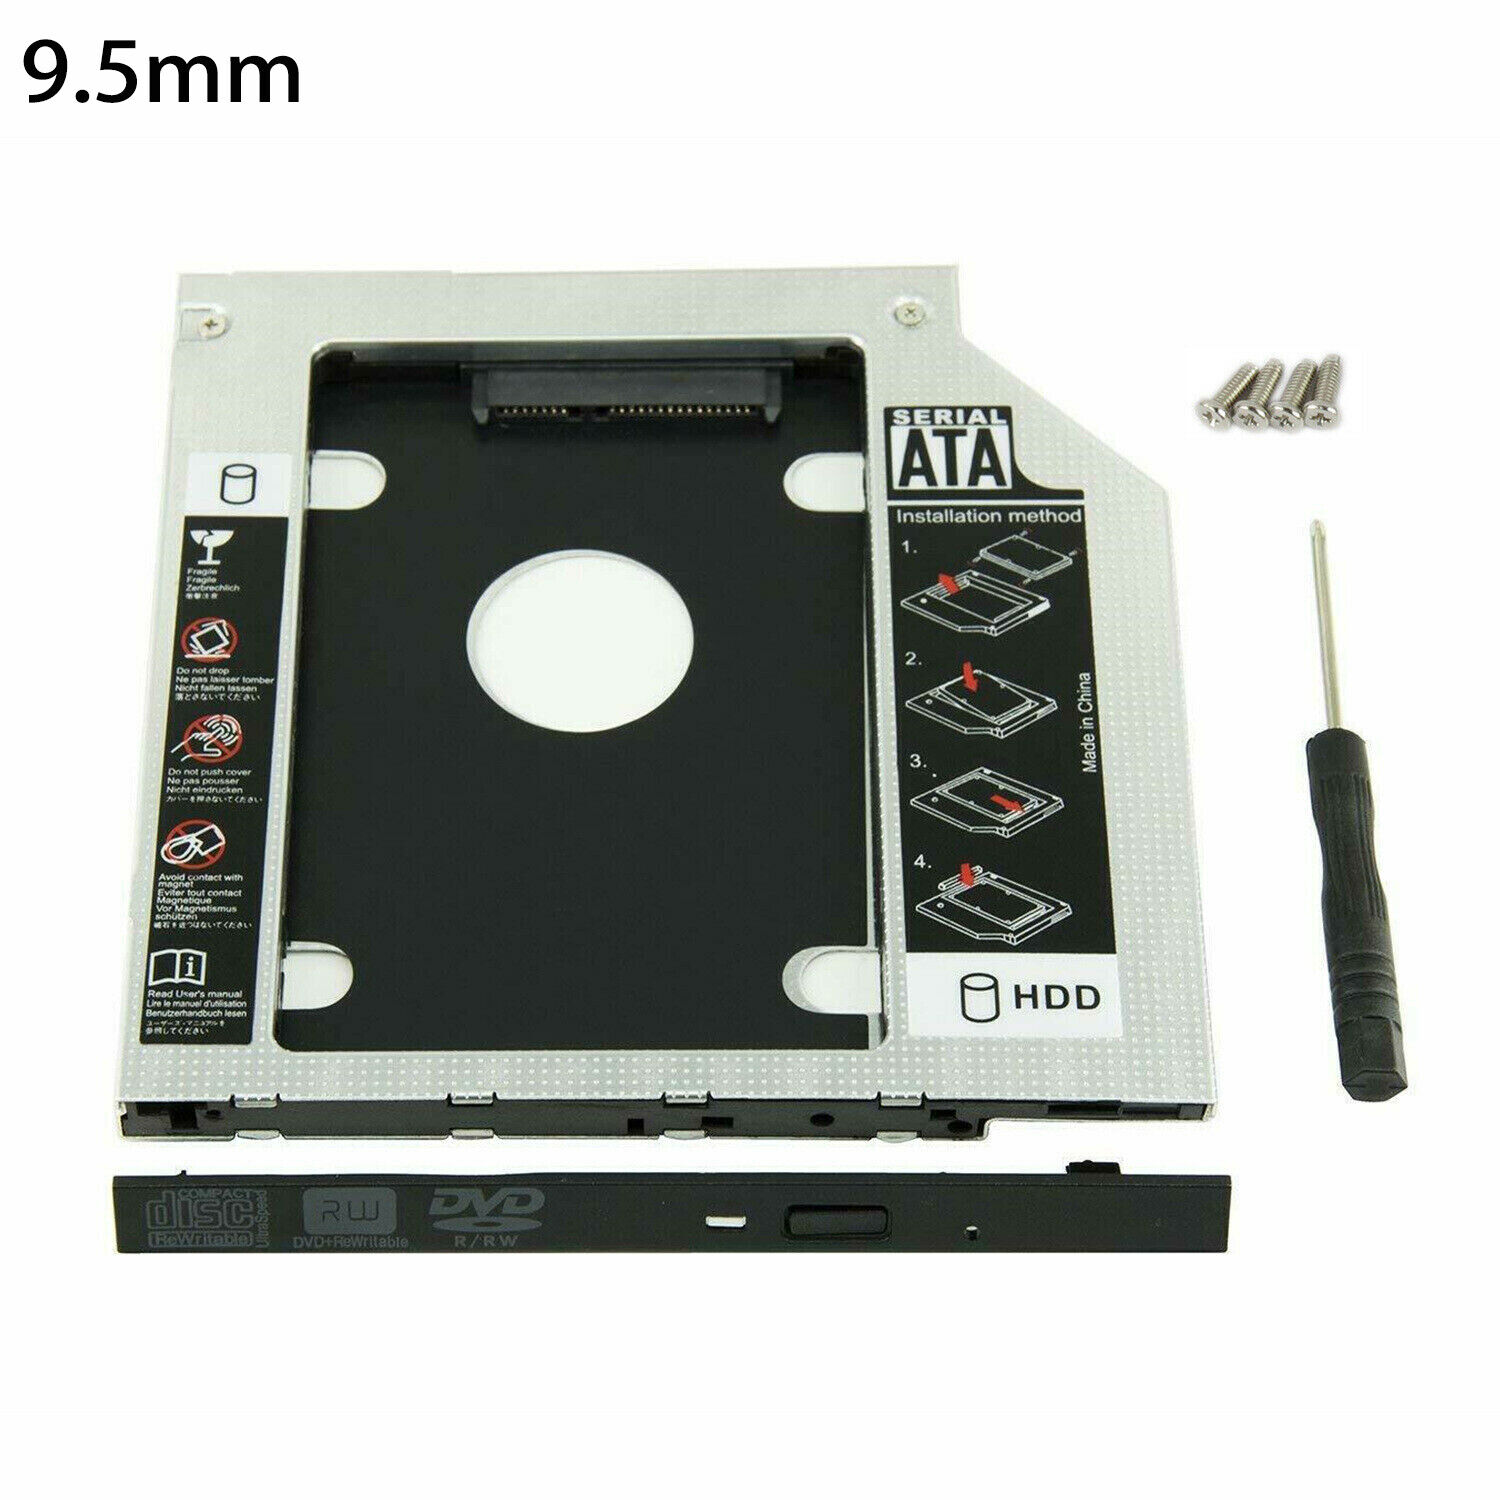 9.5mm Universal Caddy For SATA 2nd HDD SSD Hard Drive CD/DVD-ROM Optical Bay US